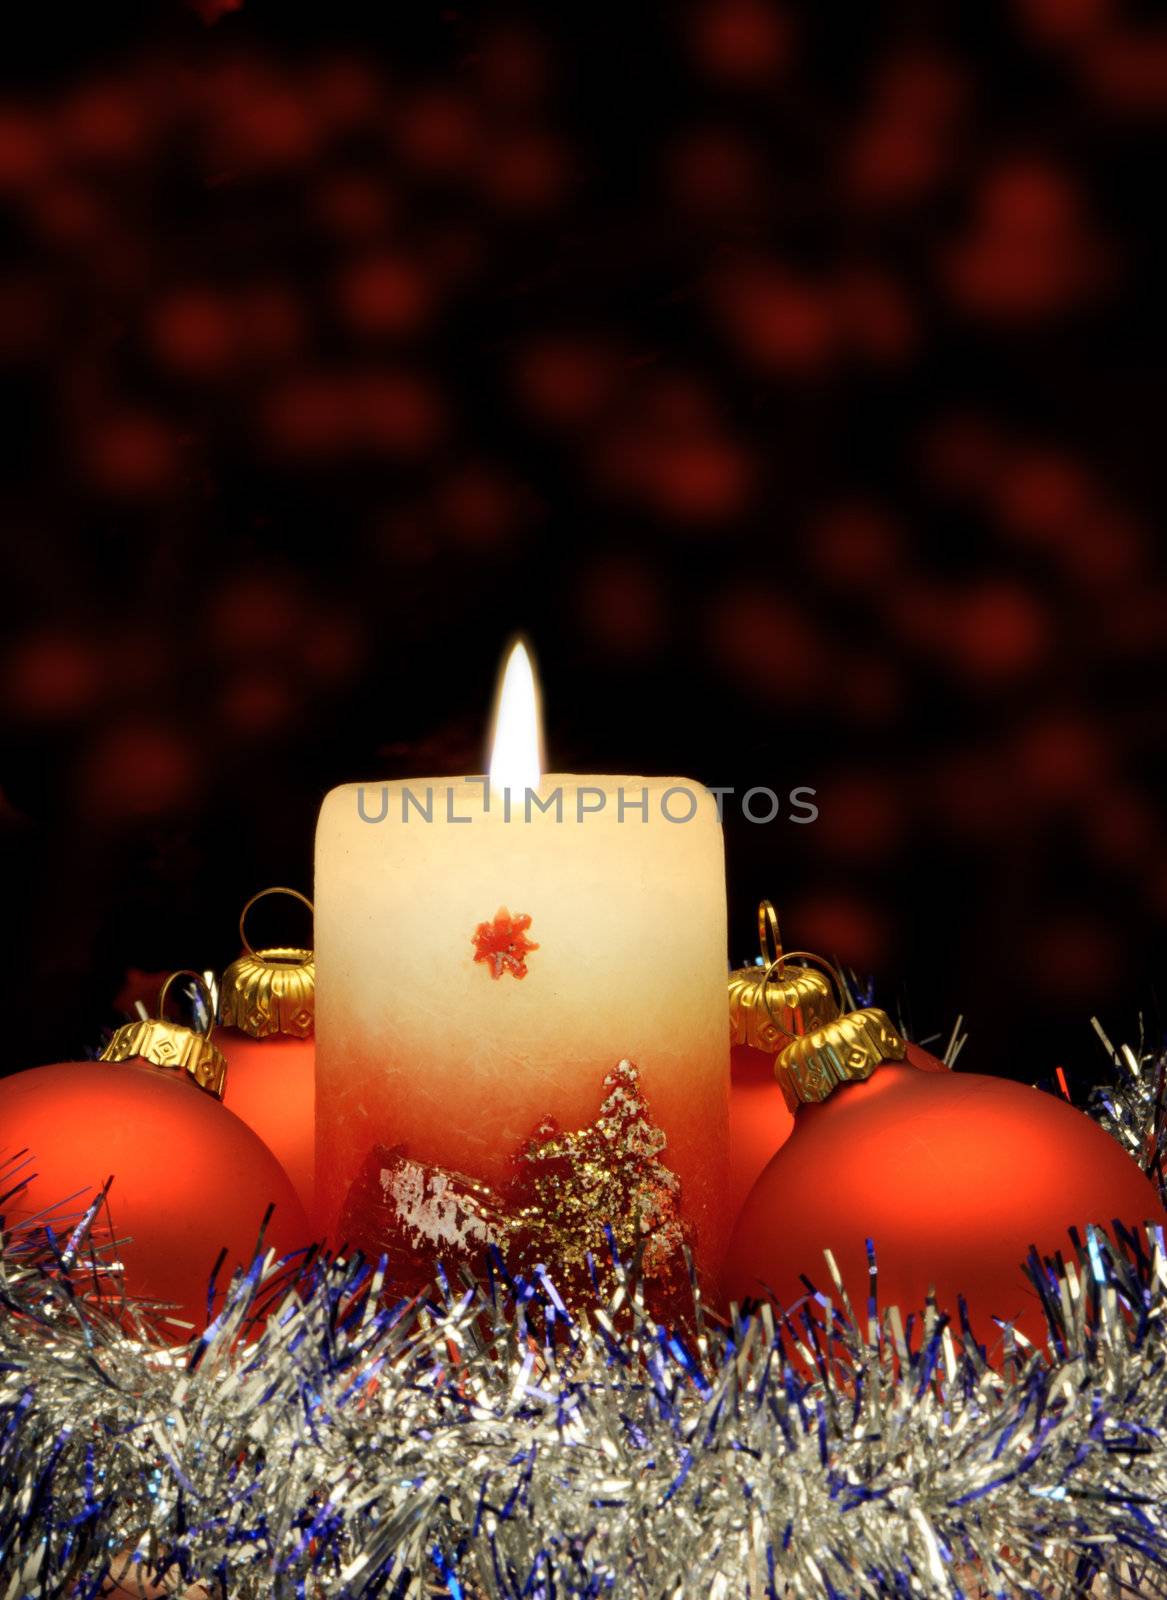 Christmas candle and red spheres. A celebratory composition